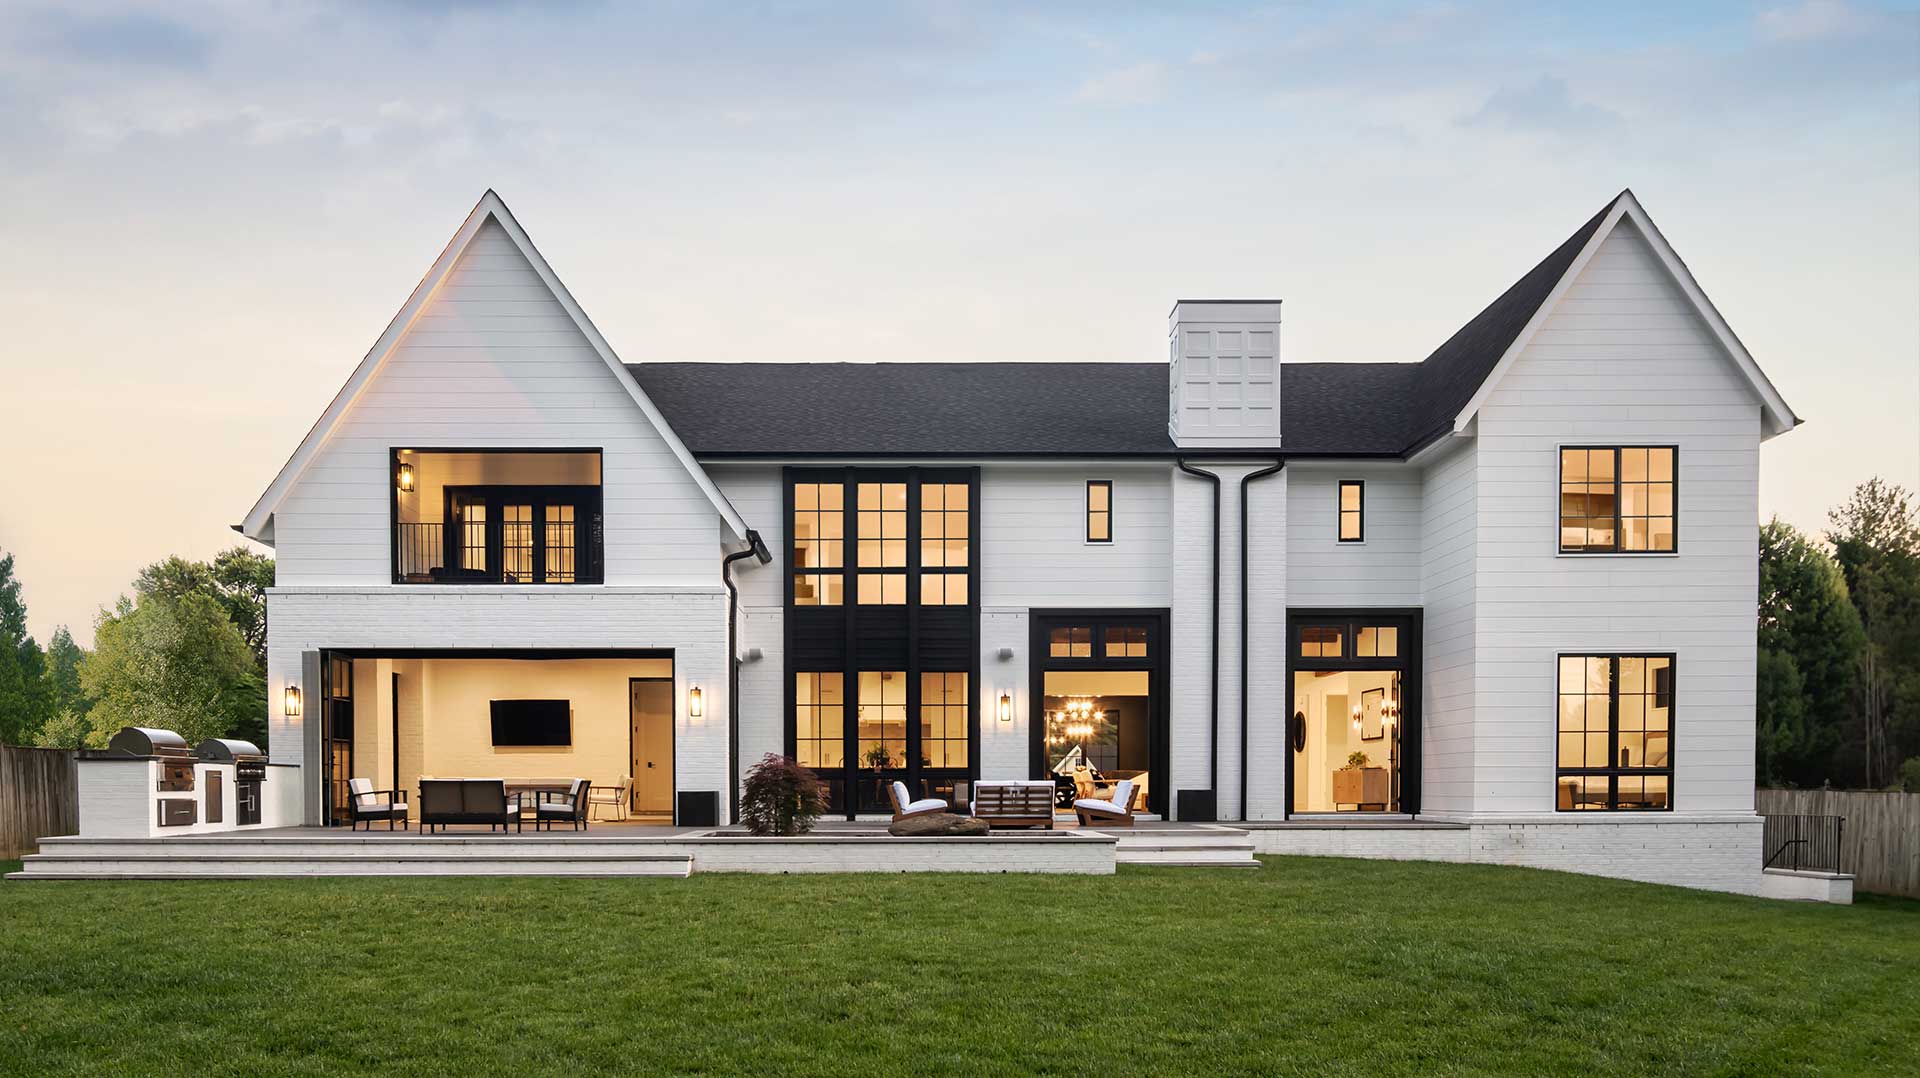 The rear of a custom modern farmhouse with an indoor outdoor space open the terraced rear patio, additional exterior doors also open, with lights in all windows against a darkening sky.